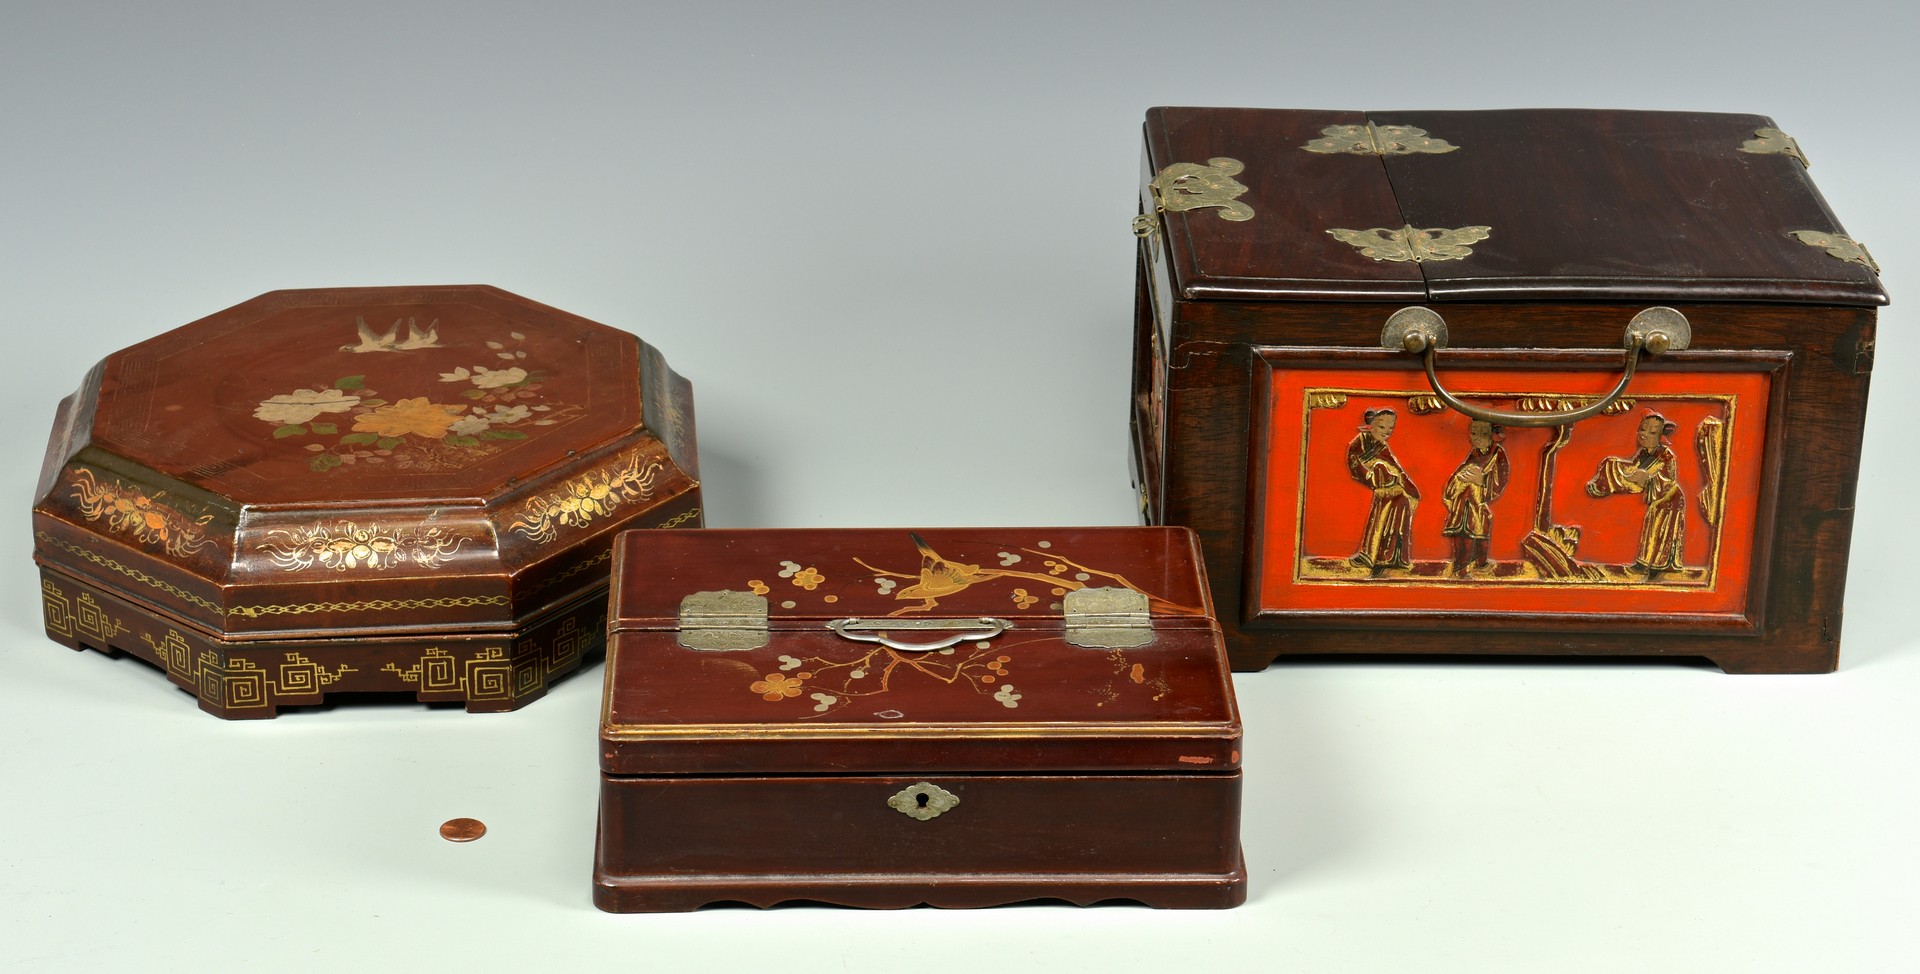 Lot 757: 3 Asian Lacquered Boxes